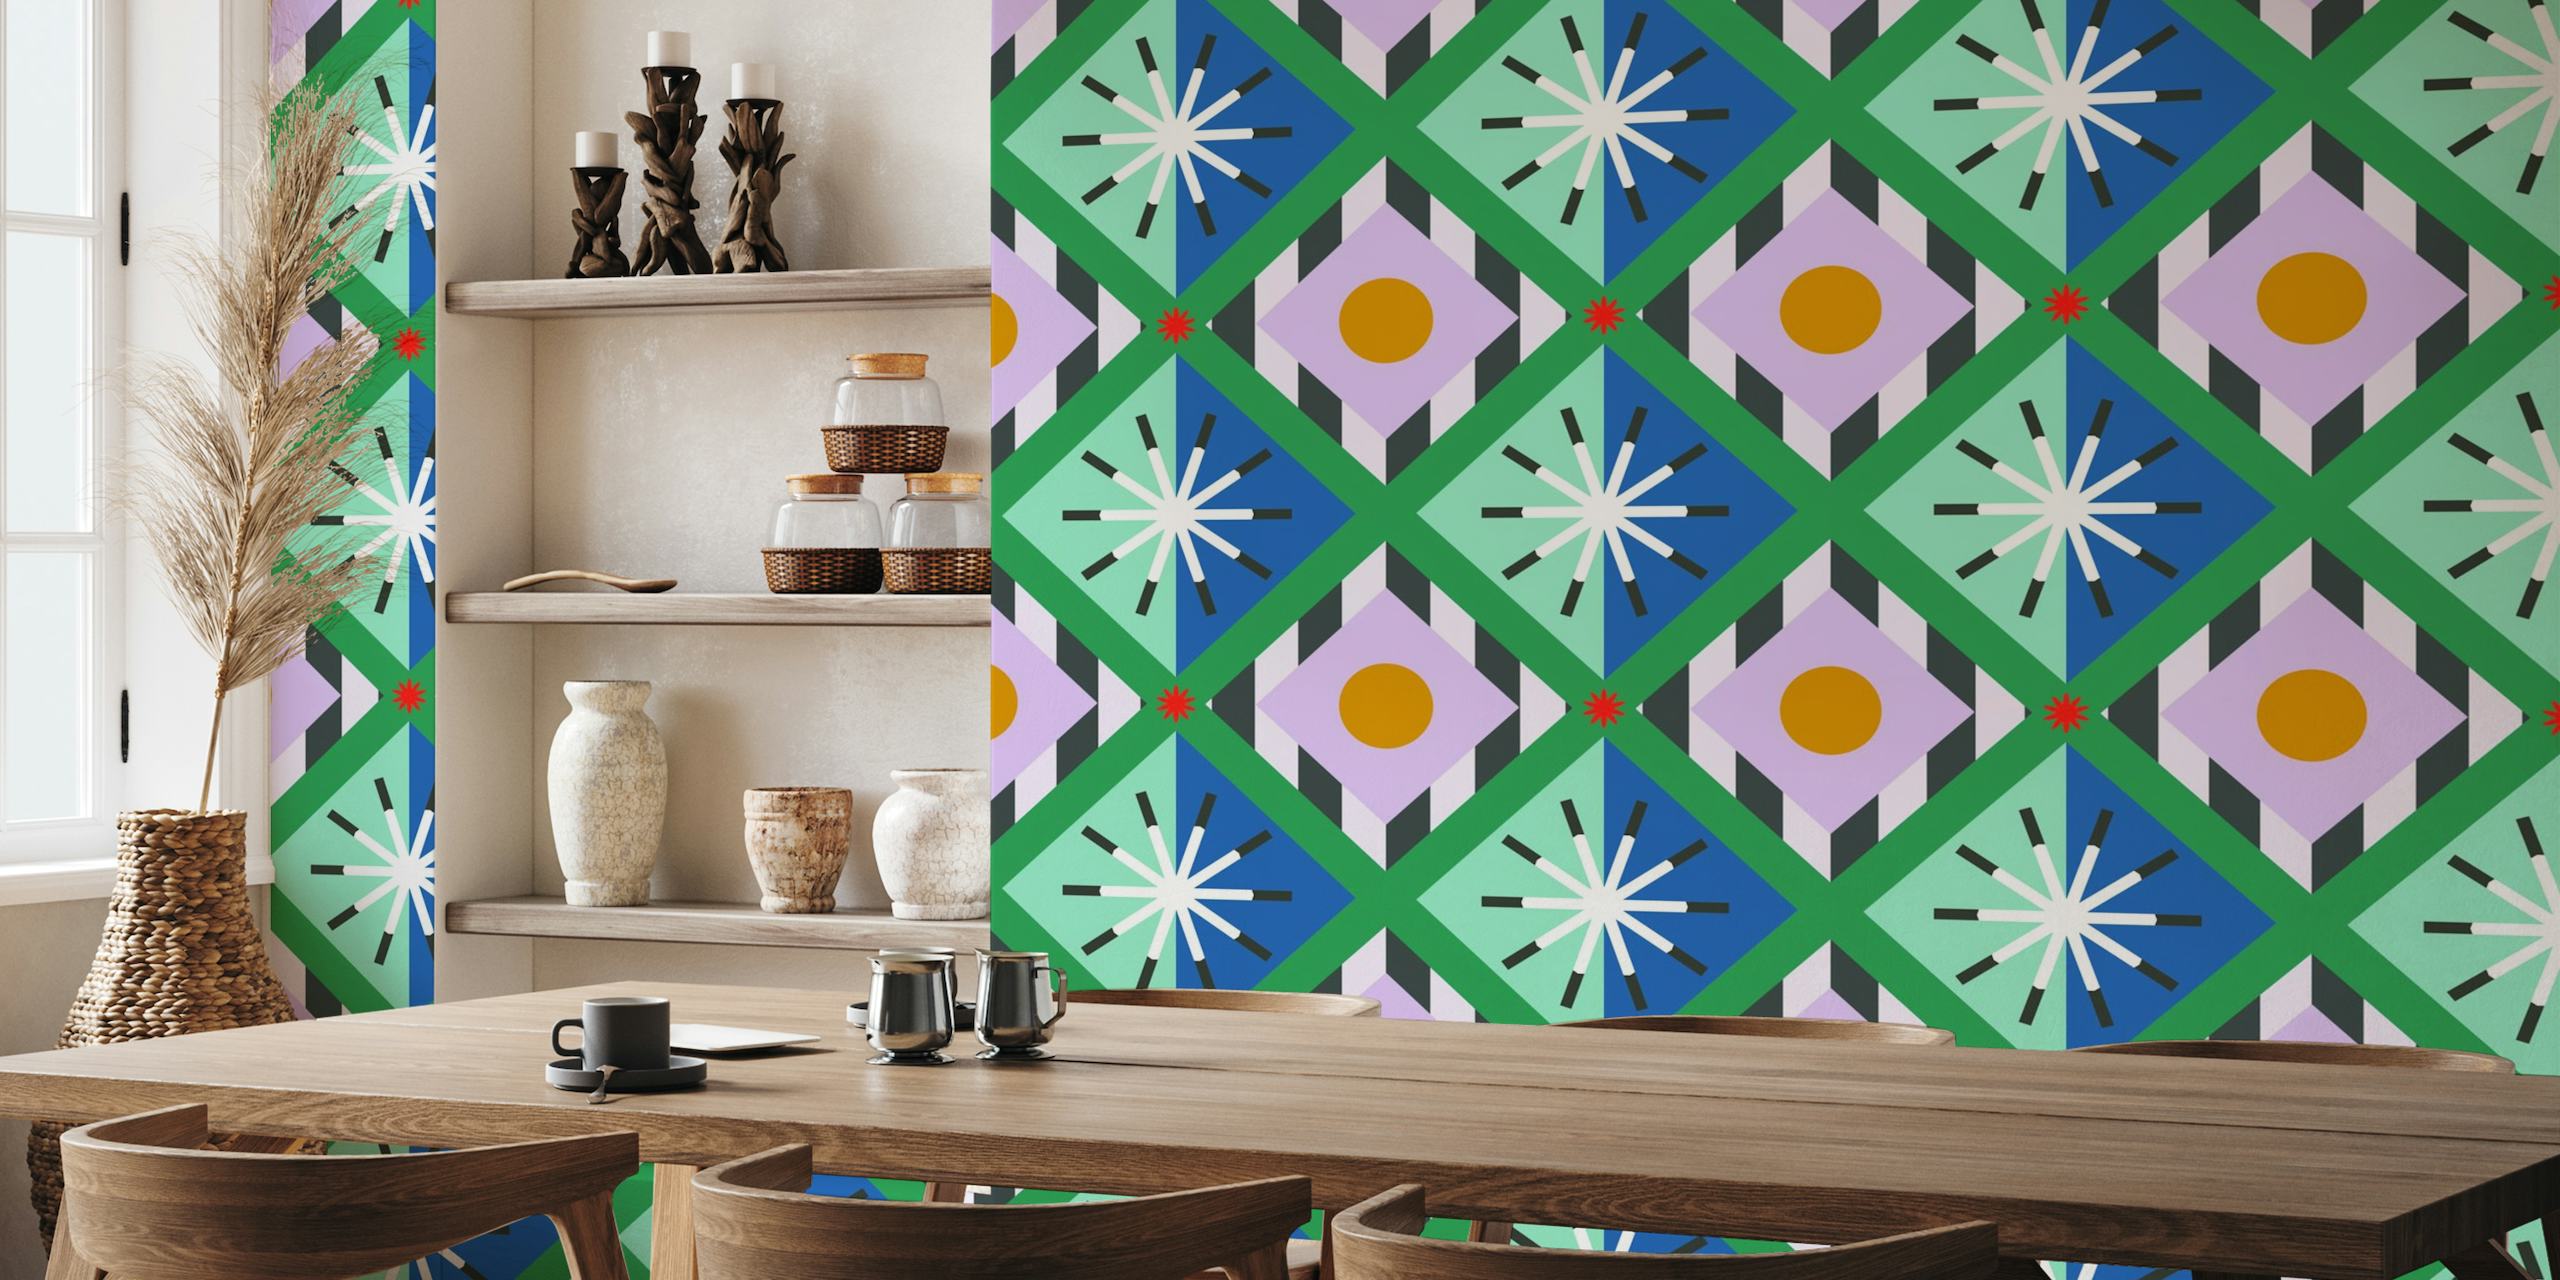 New Memphis style wall mural with bold geometric shapes in pastel colors